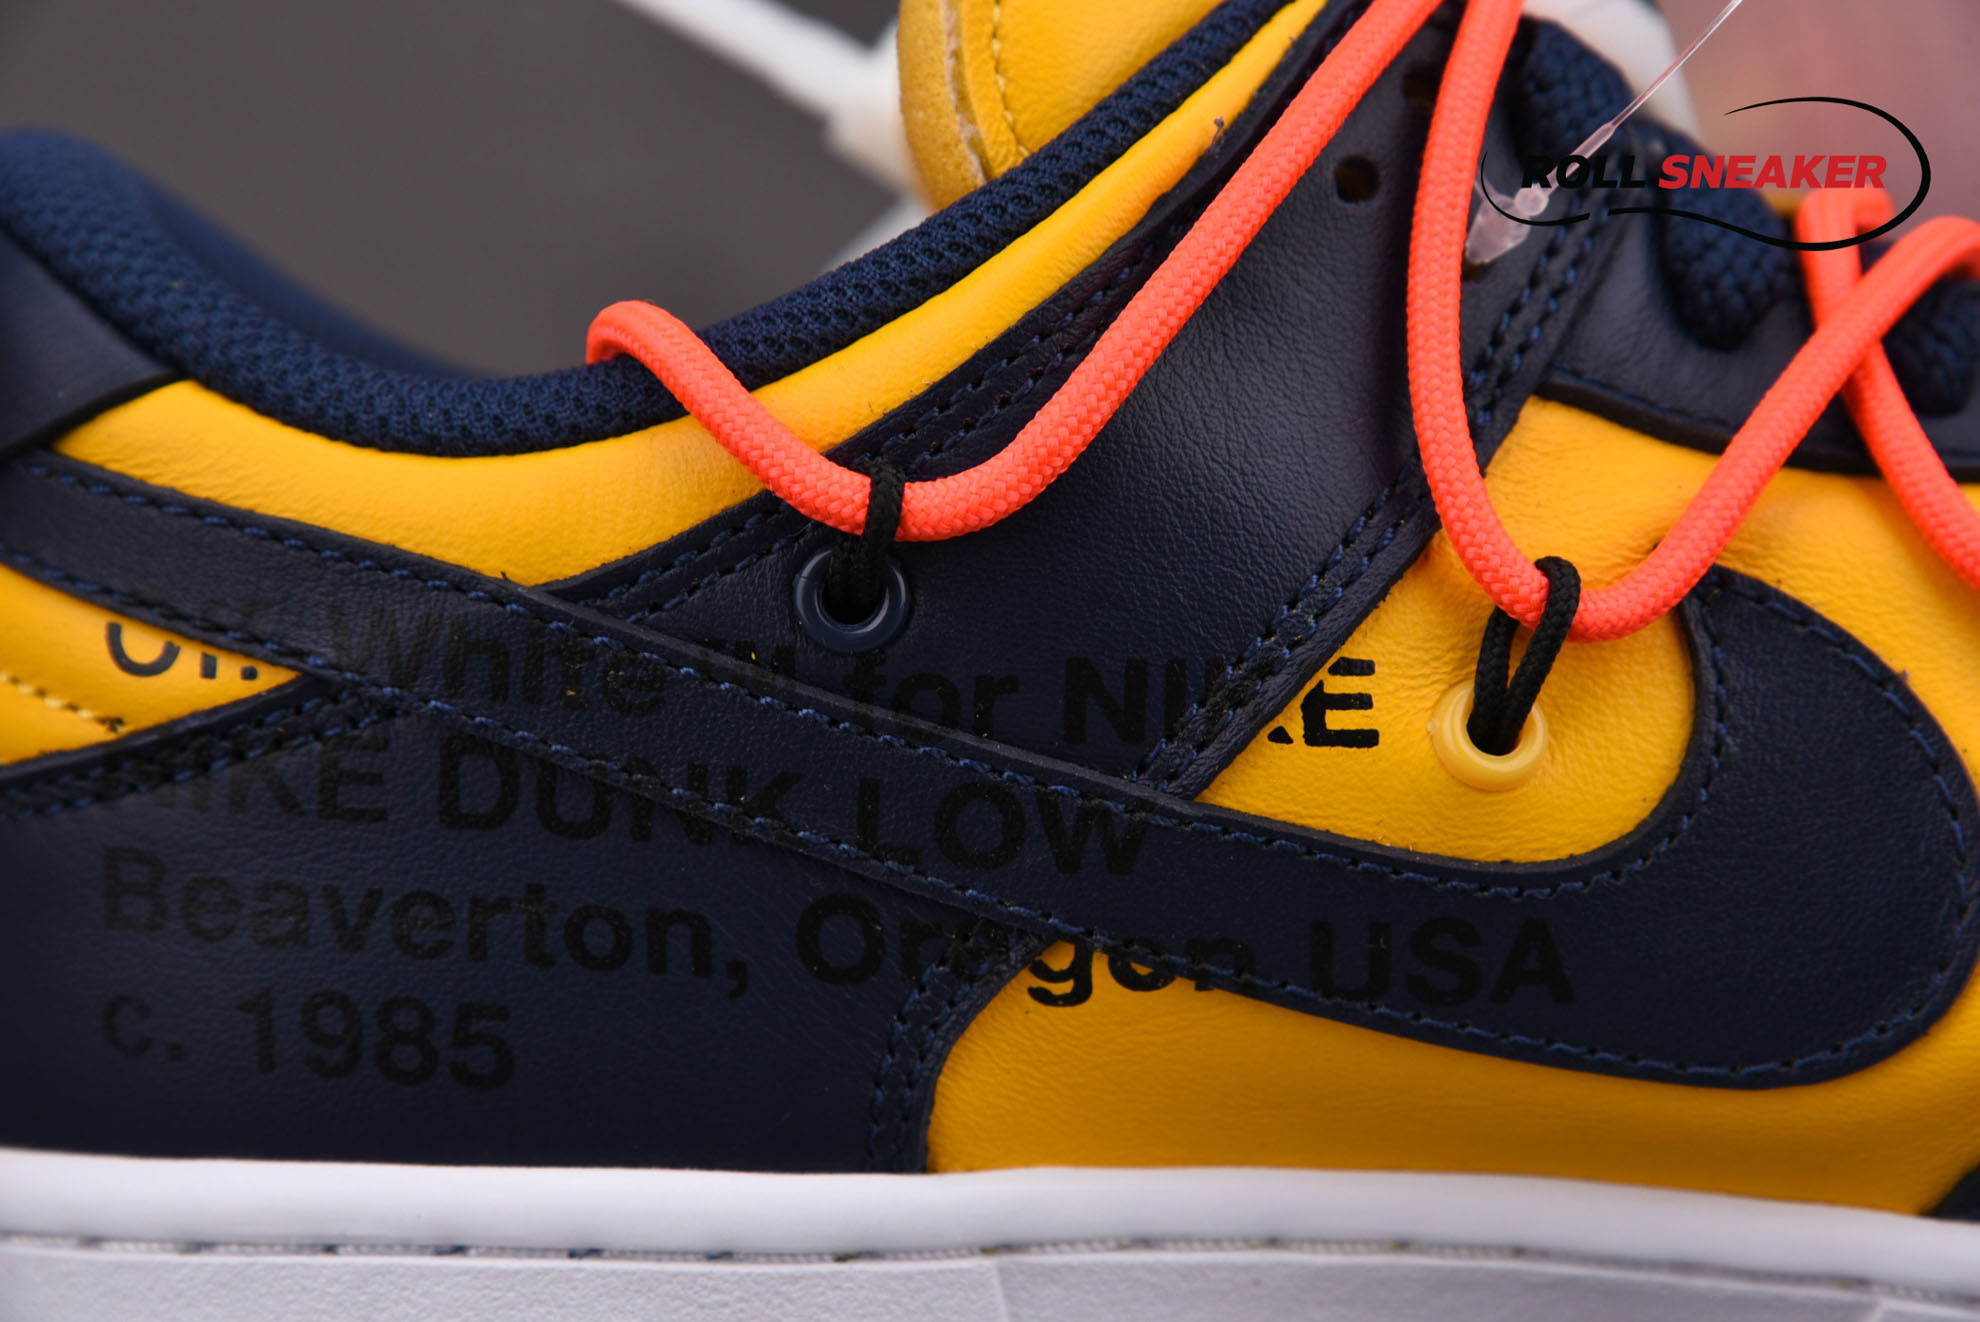 Nike Dunk Low Off-White ‘University Gold Midnight Navy’
